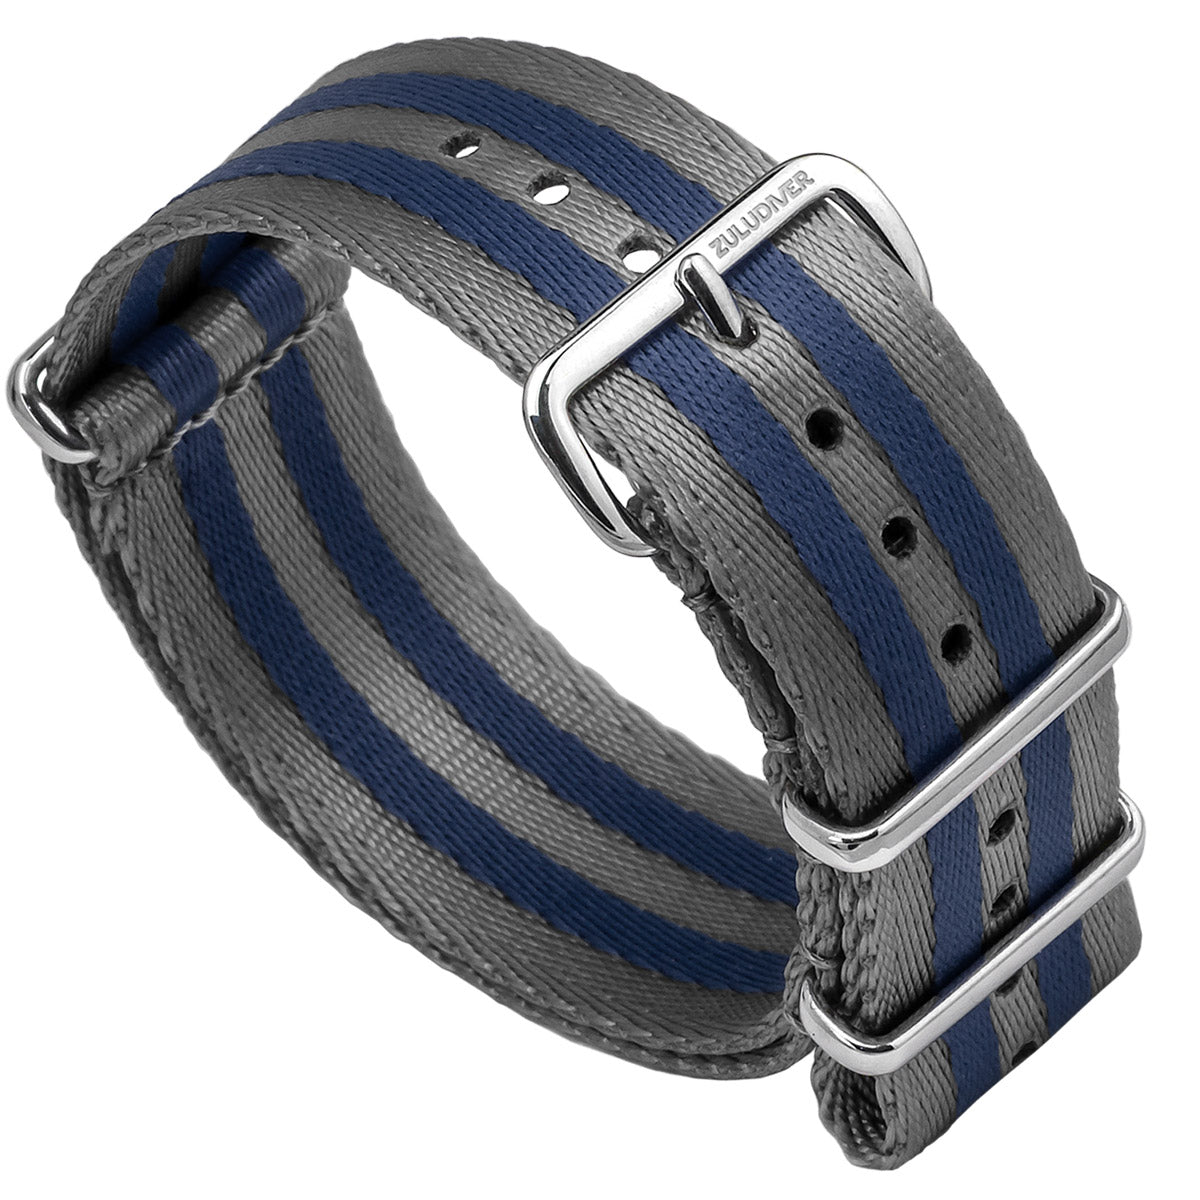 Omega style NATO Watch Straps, grey and blue stripe colours, white background image